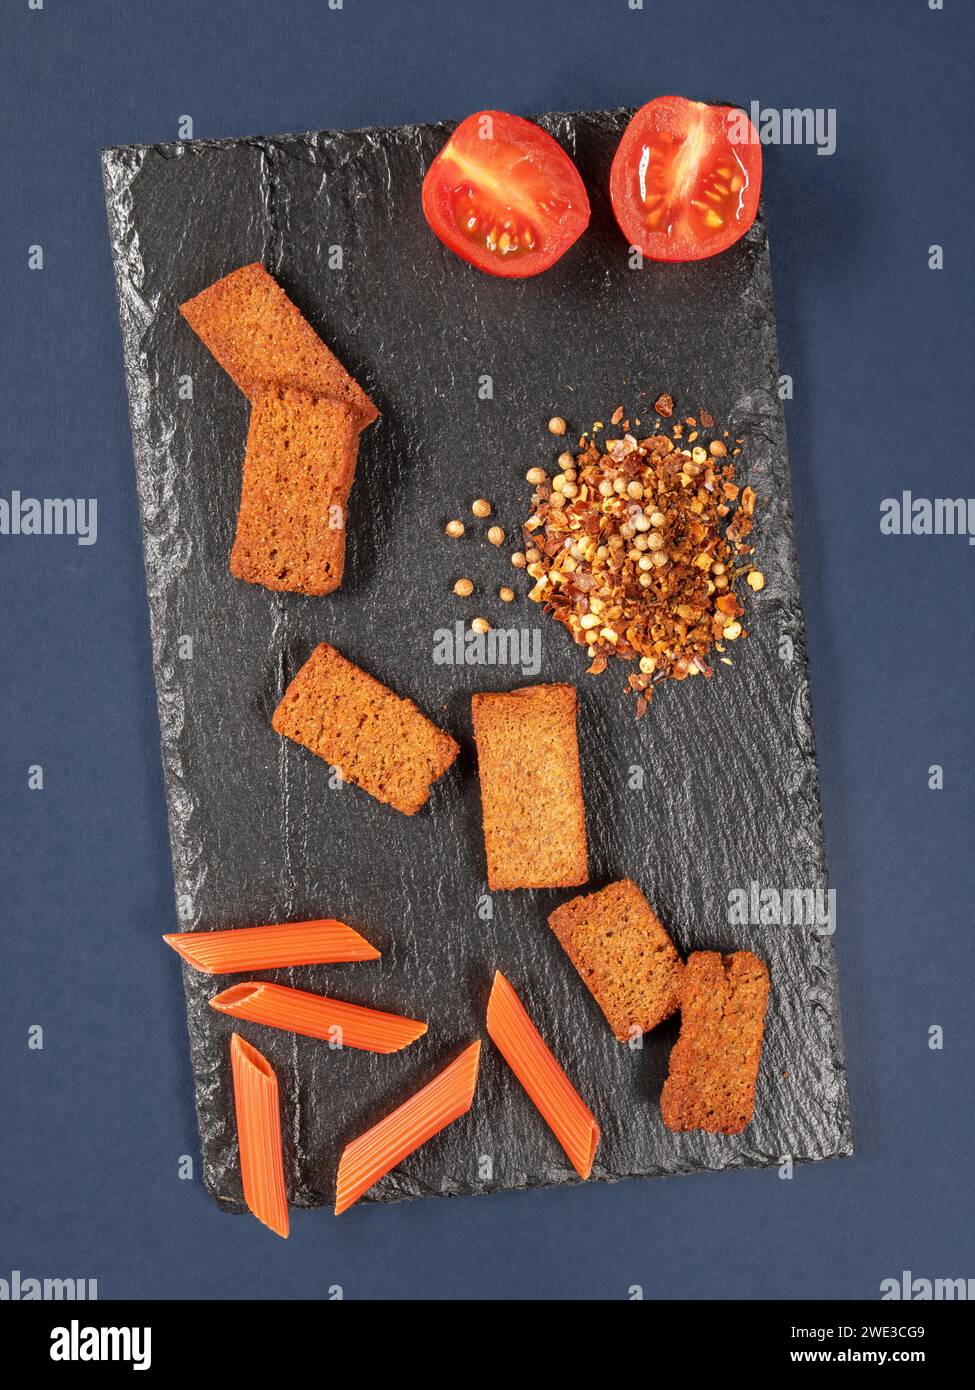 A visually appealing still life arrangement of fresh tomatoes, croutons, and an assortment of spices on a slate board. Ideal for culinary, cooking, or Stock Photo